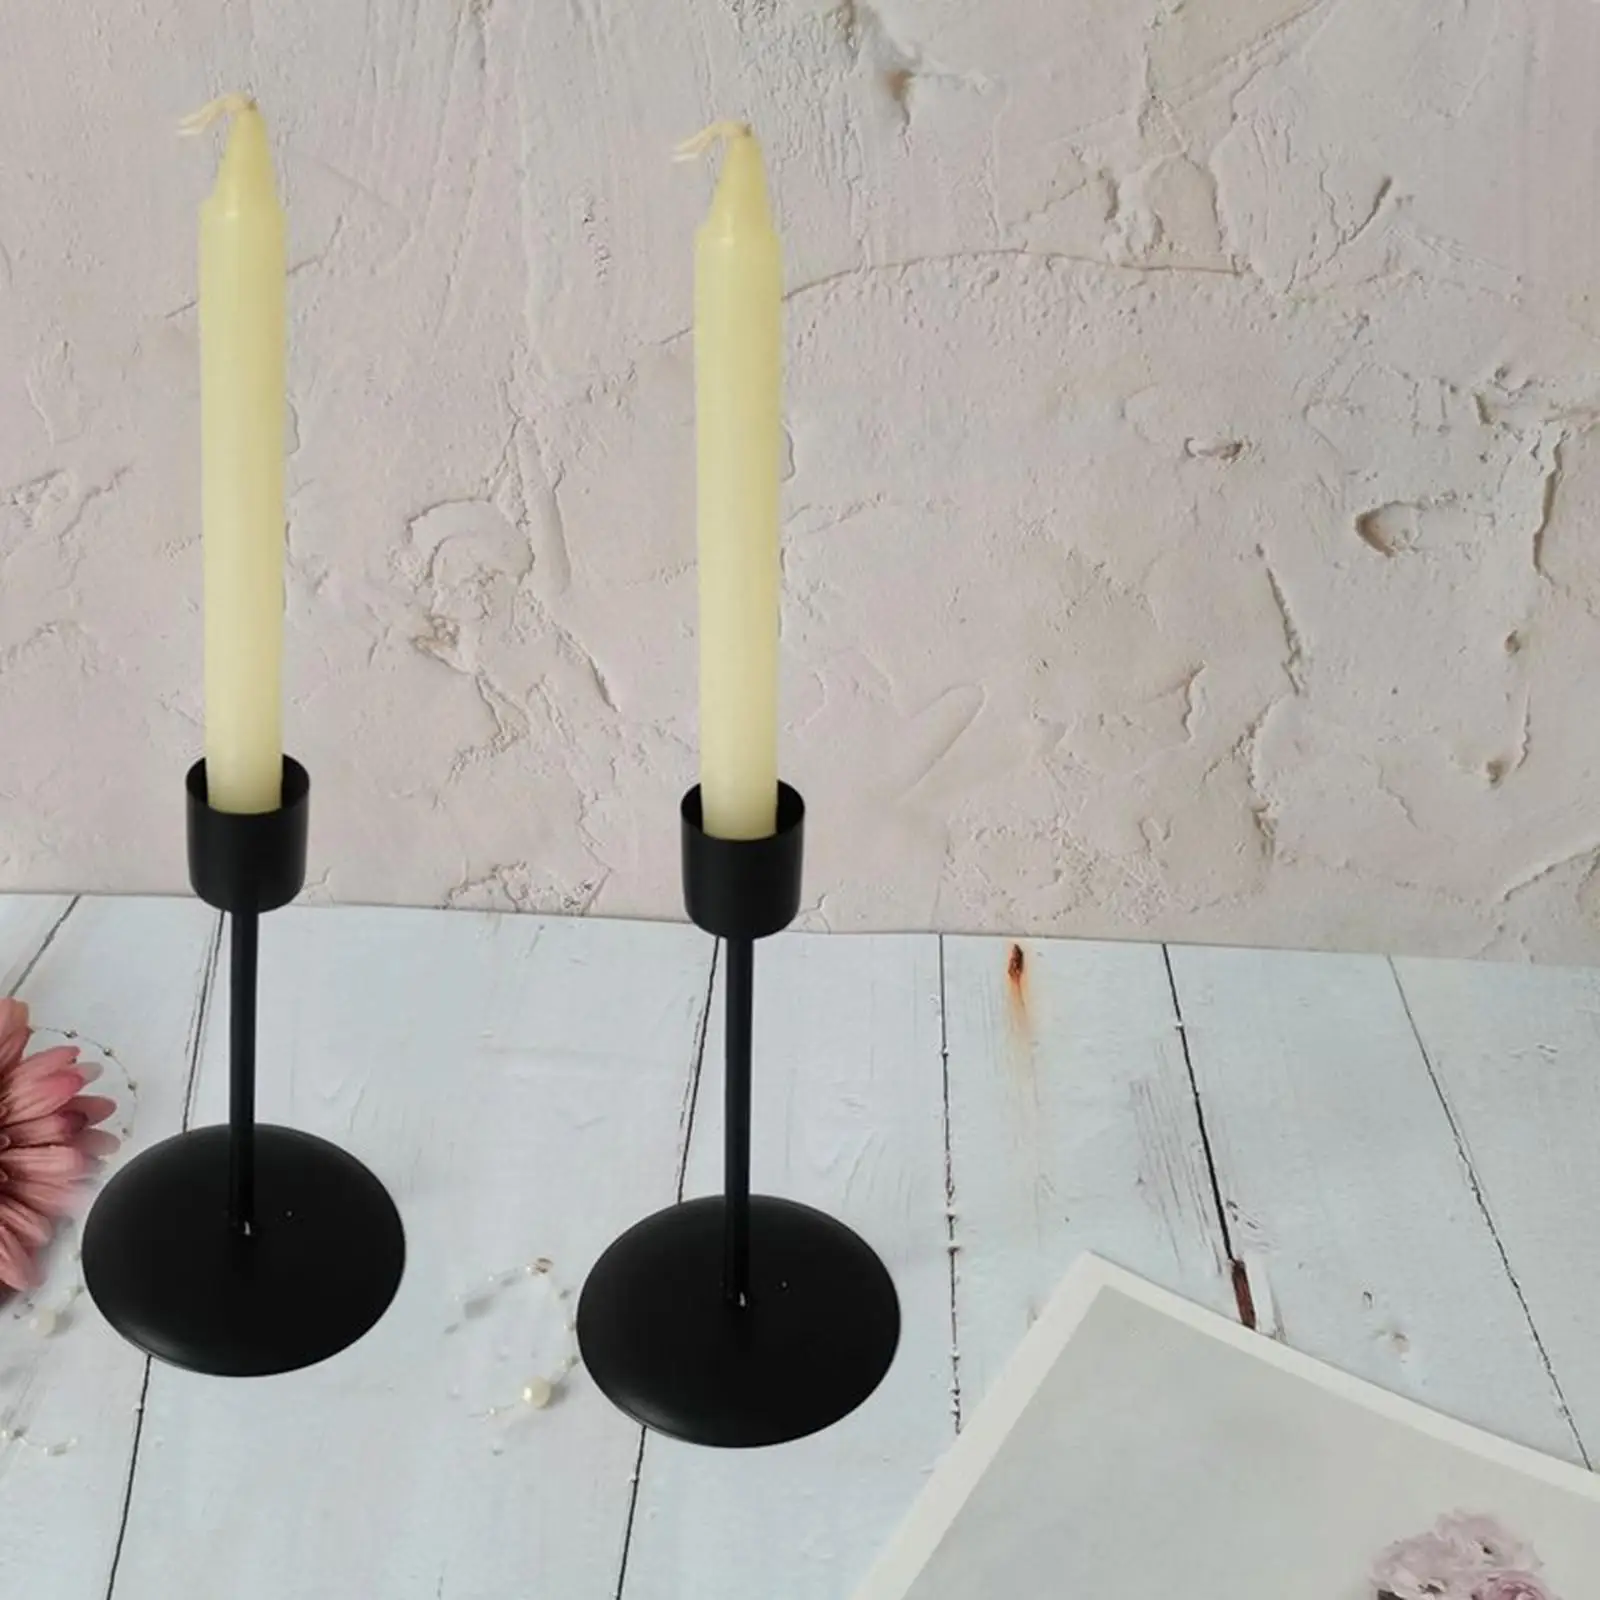 2x Iron Taper Candle Holder Candlestick Table Centerpiece Bathroomr